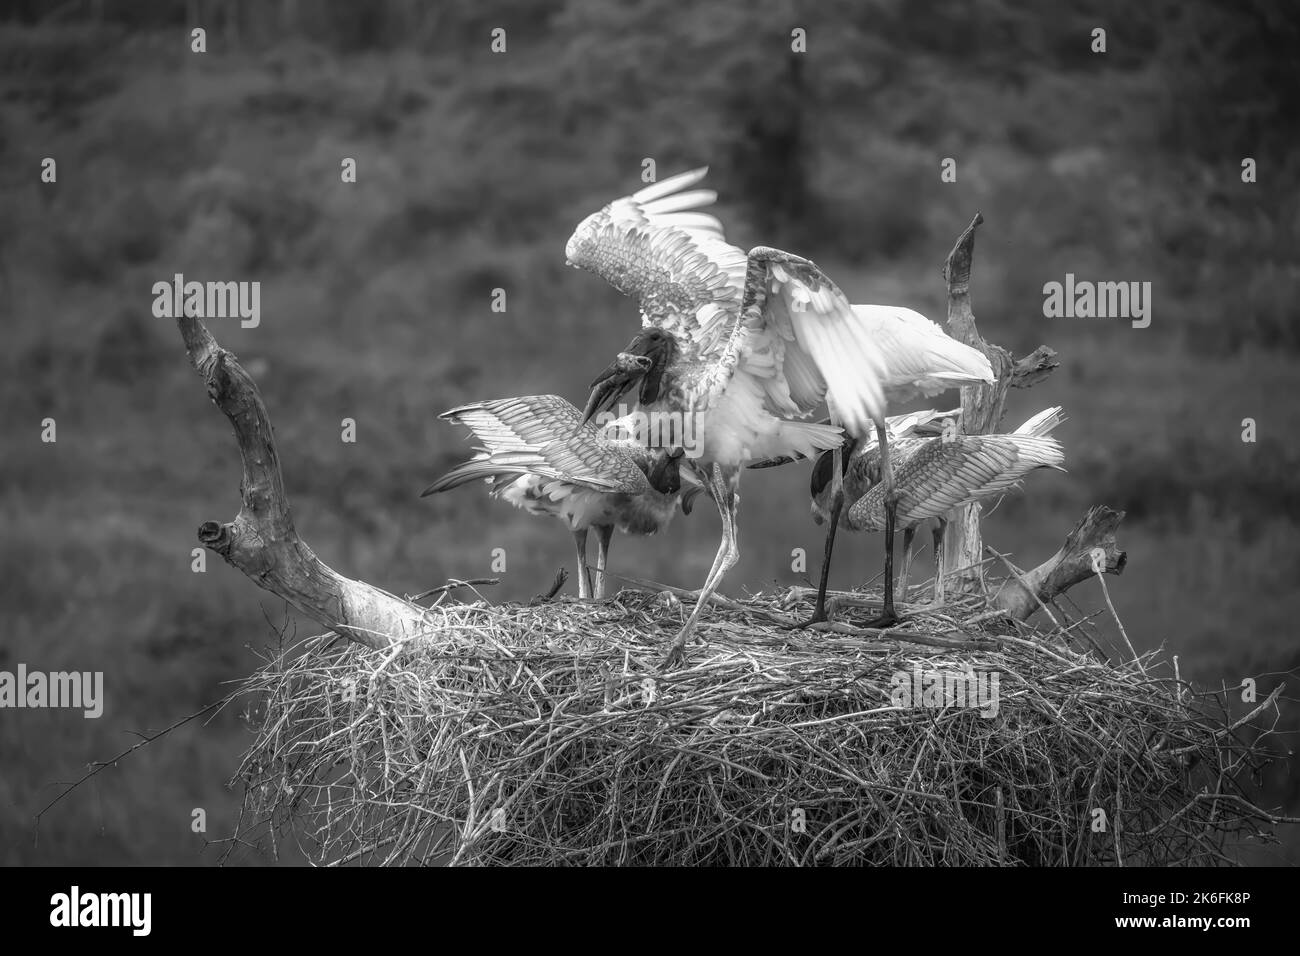 Black and white image of Jabiru storks on a nest -adult and young - feeding Stock Photo